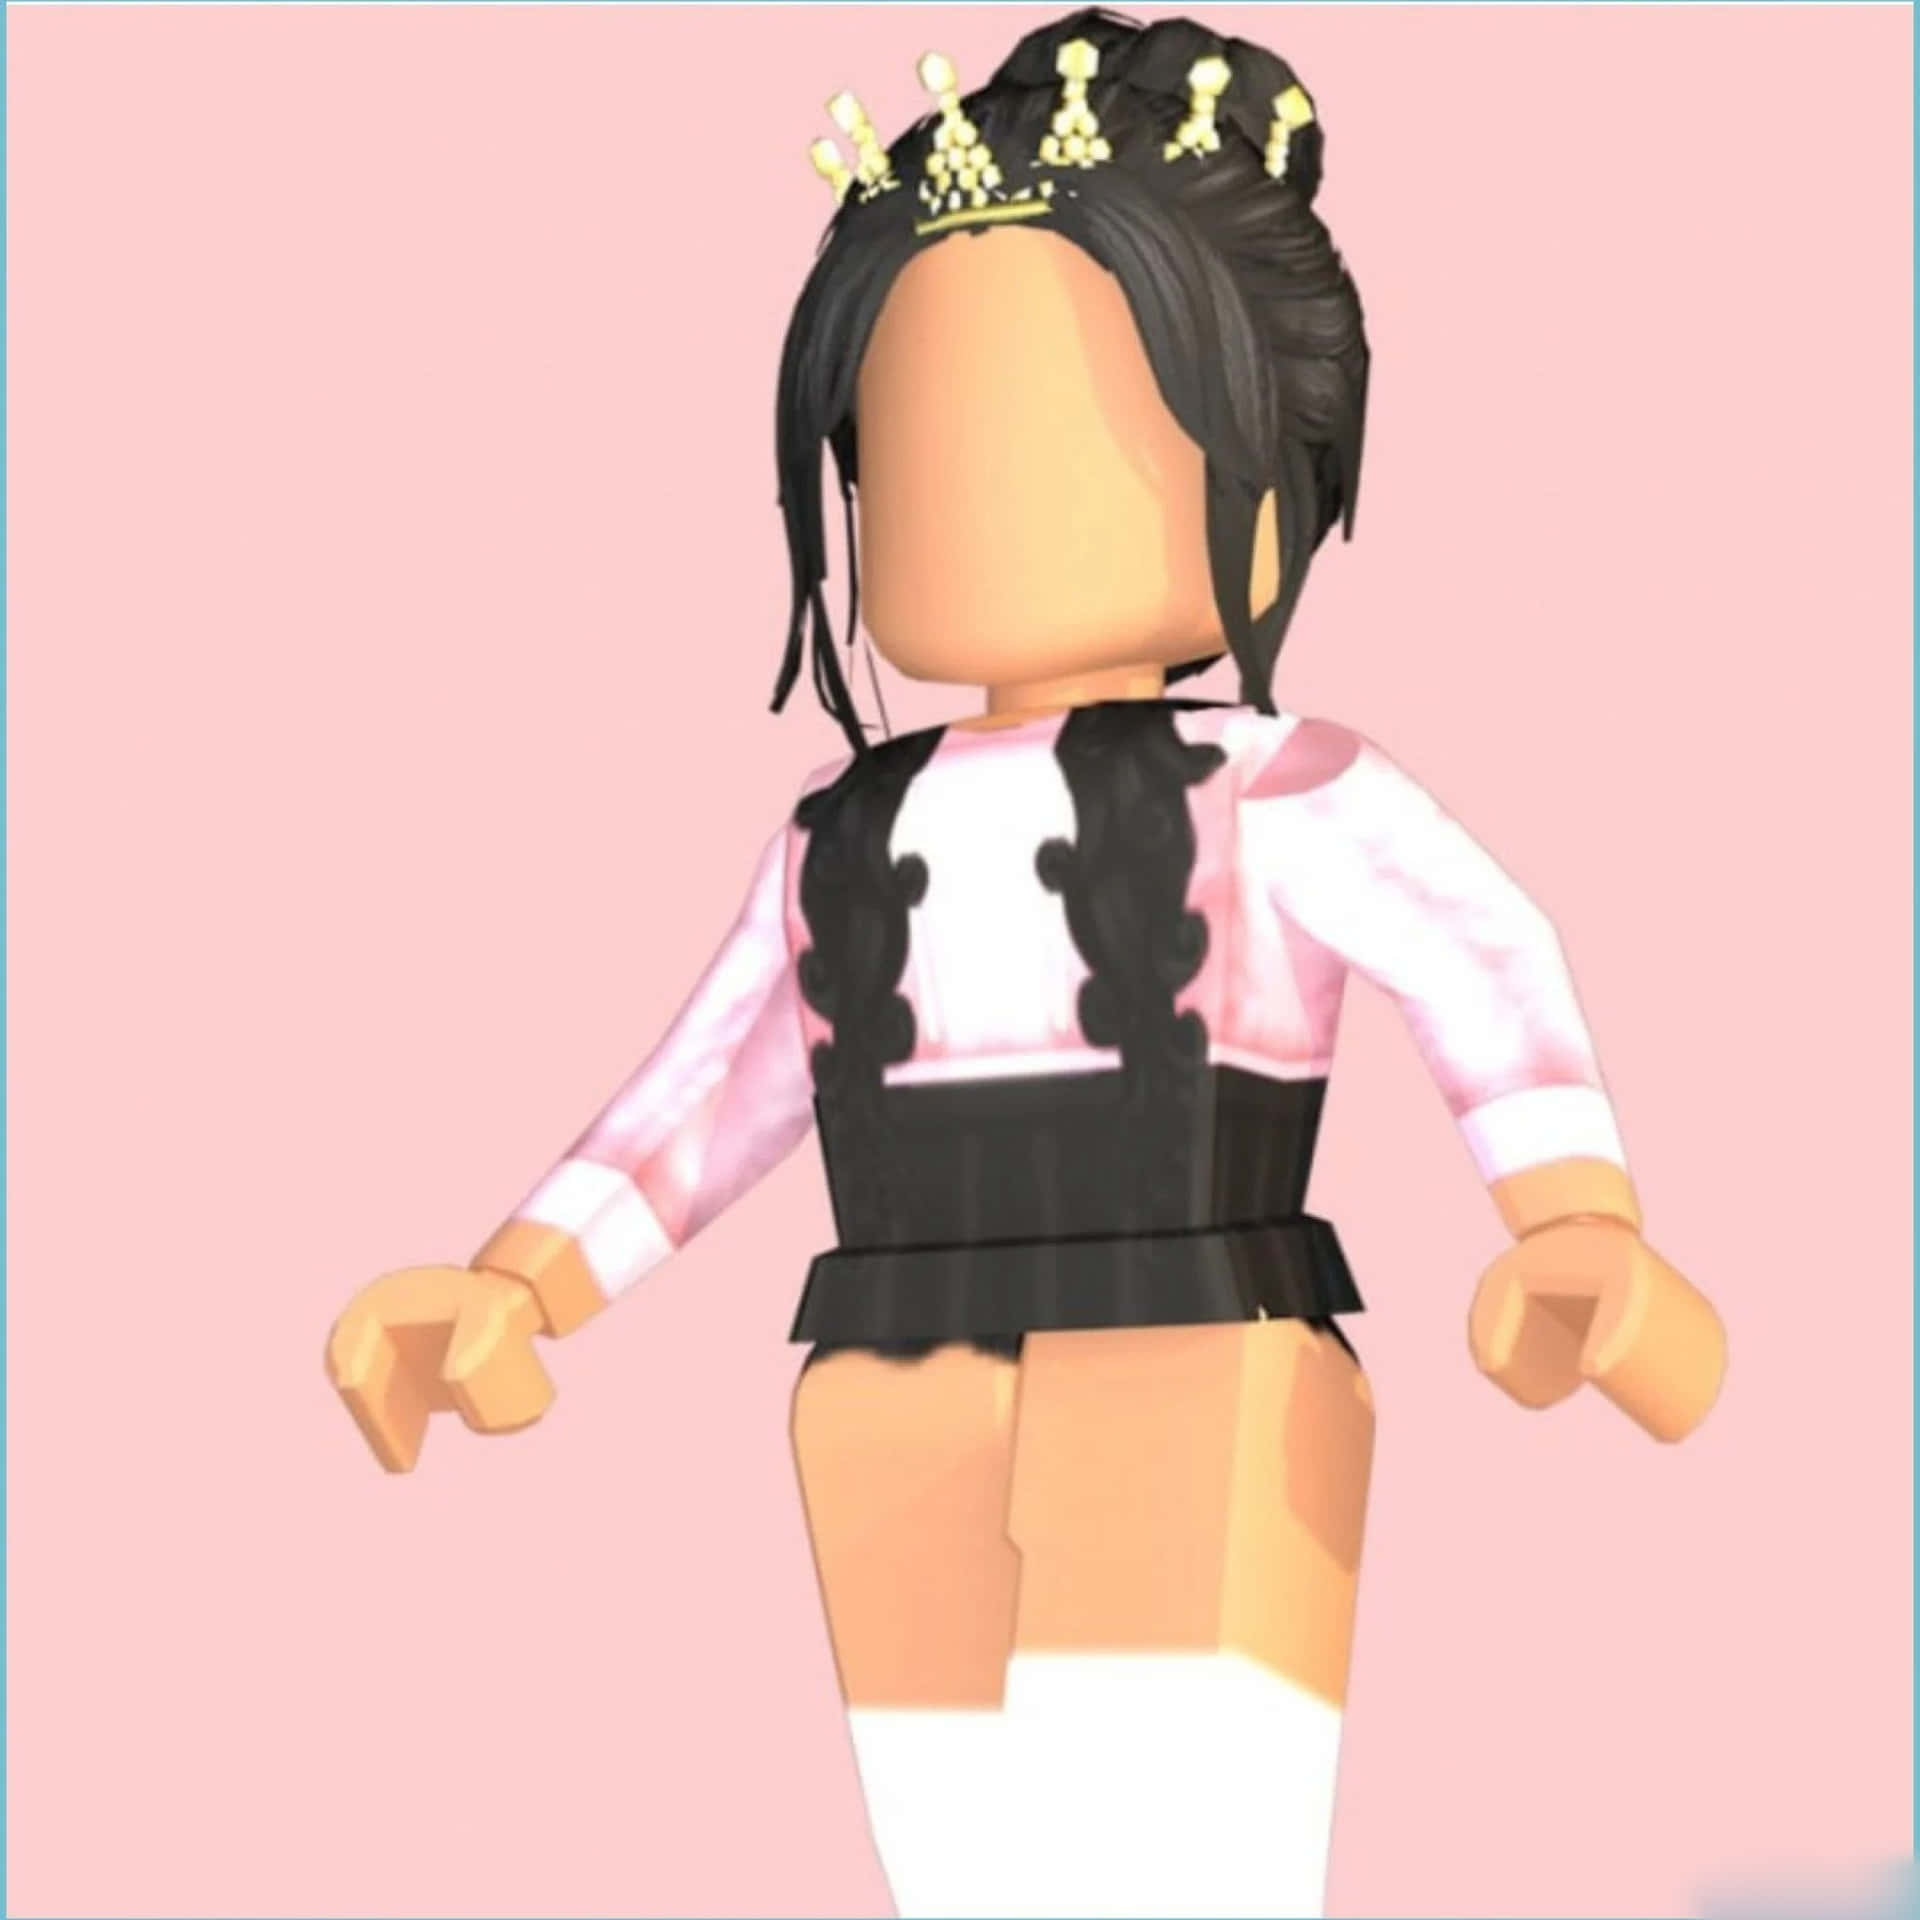 Download Aesthetic Roblox Girl with a Captivating Pink Style